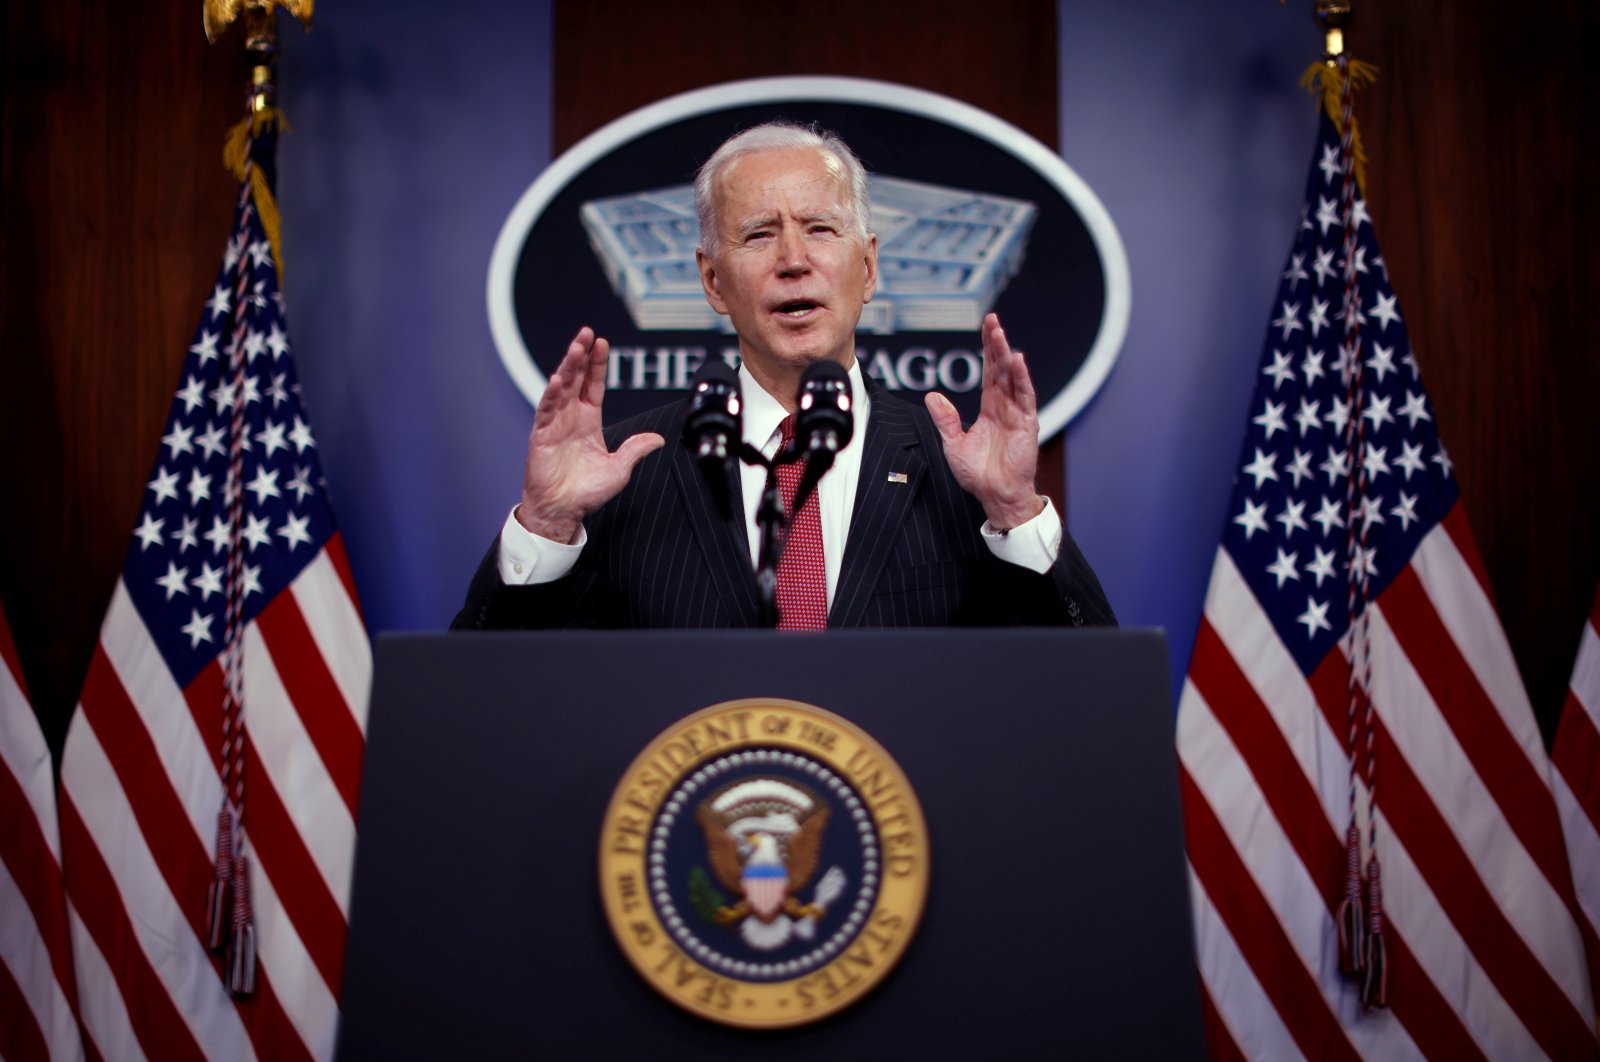 U.S. President Joe Biden delivers remarks to Defense Department personnel during a visit to the Pentagon in Arlington, Virginia, U.S., Feb. 10, 2021. (Reuters Photo)